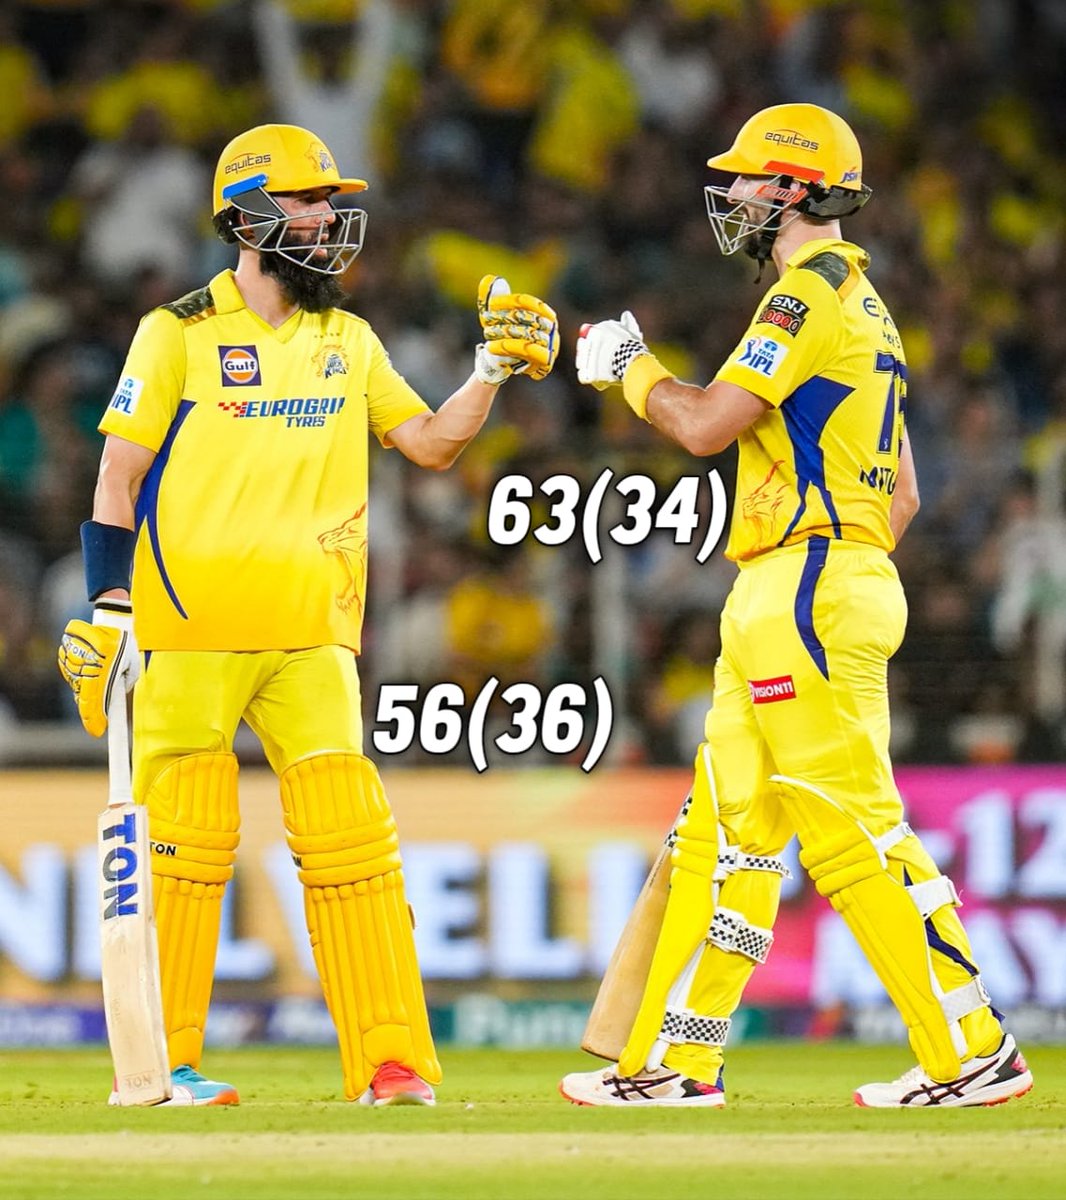 Appreciation post for Mitch - Mo partnership 💛 #WhistlePodu #CSK #GTvCSK 📸 IPL/BCCI